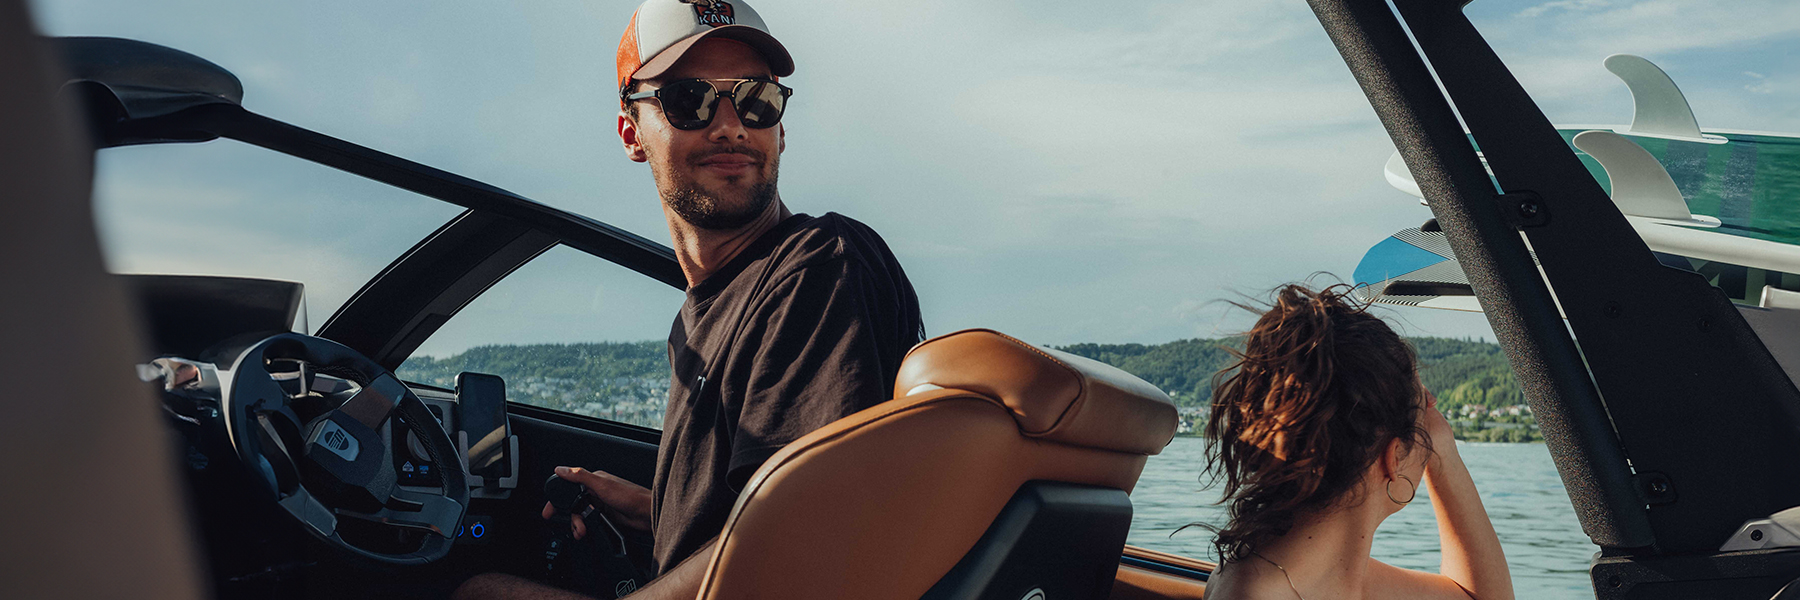 Janik Mesle at the helm of the boat during product shoots on Lake Constance